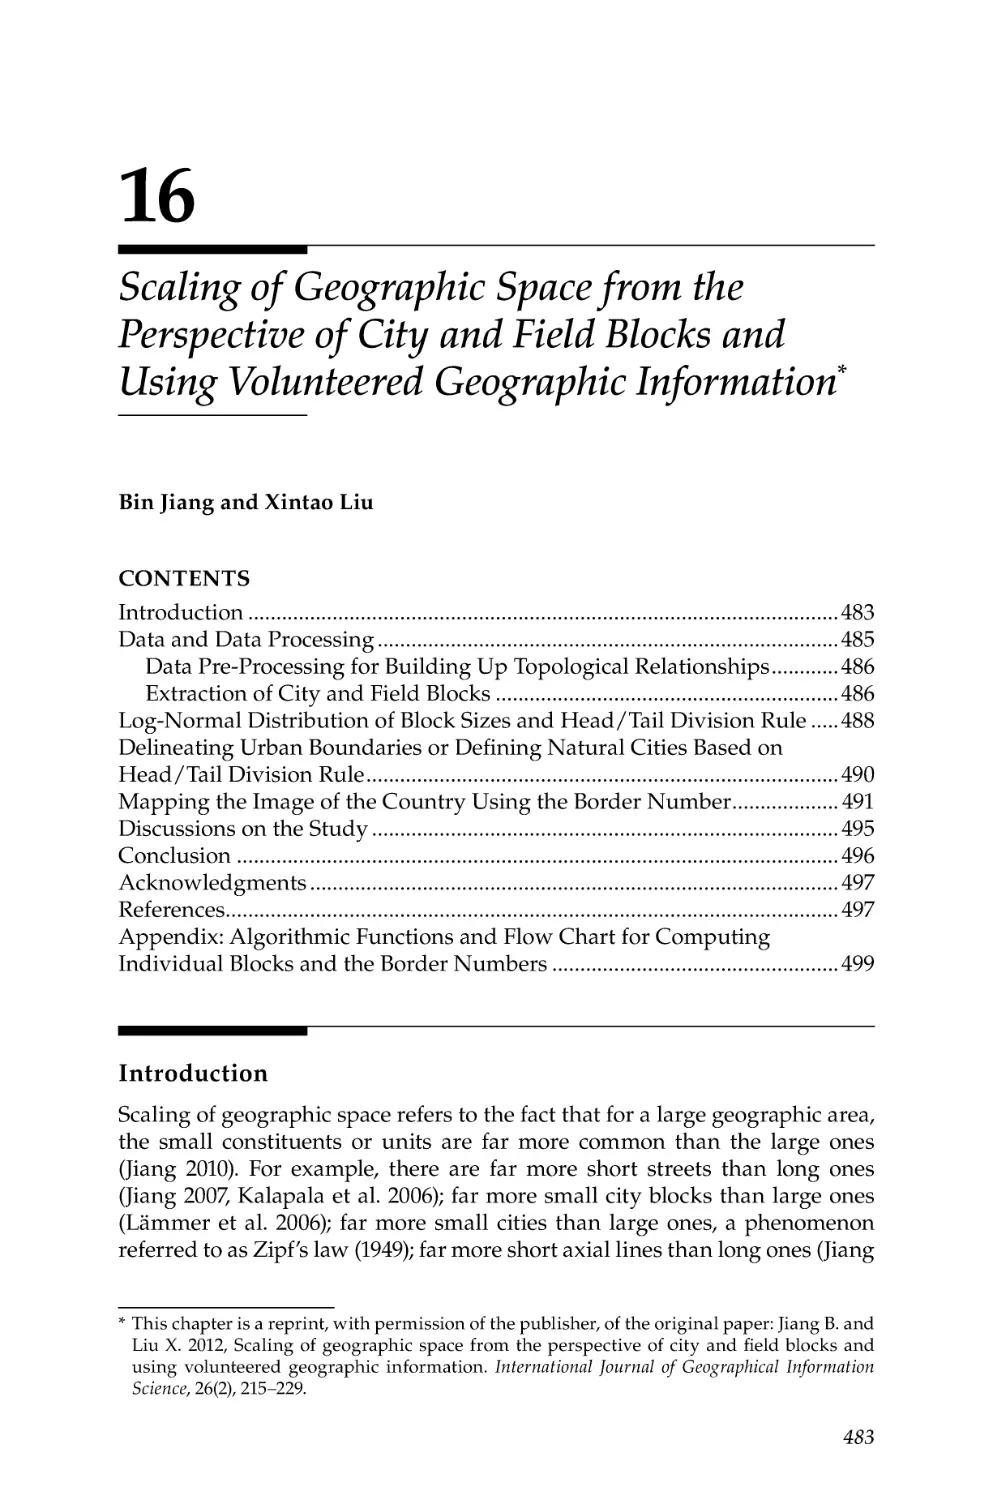 16. Scaling of Geographic Space from the Perspective of City and Field Blocks and Using Volunteered Geographic Information